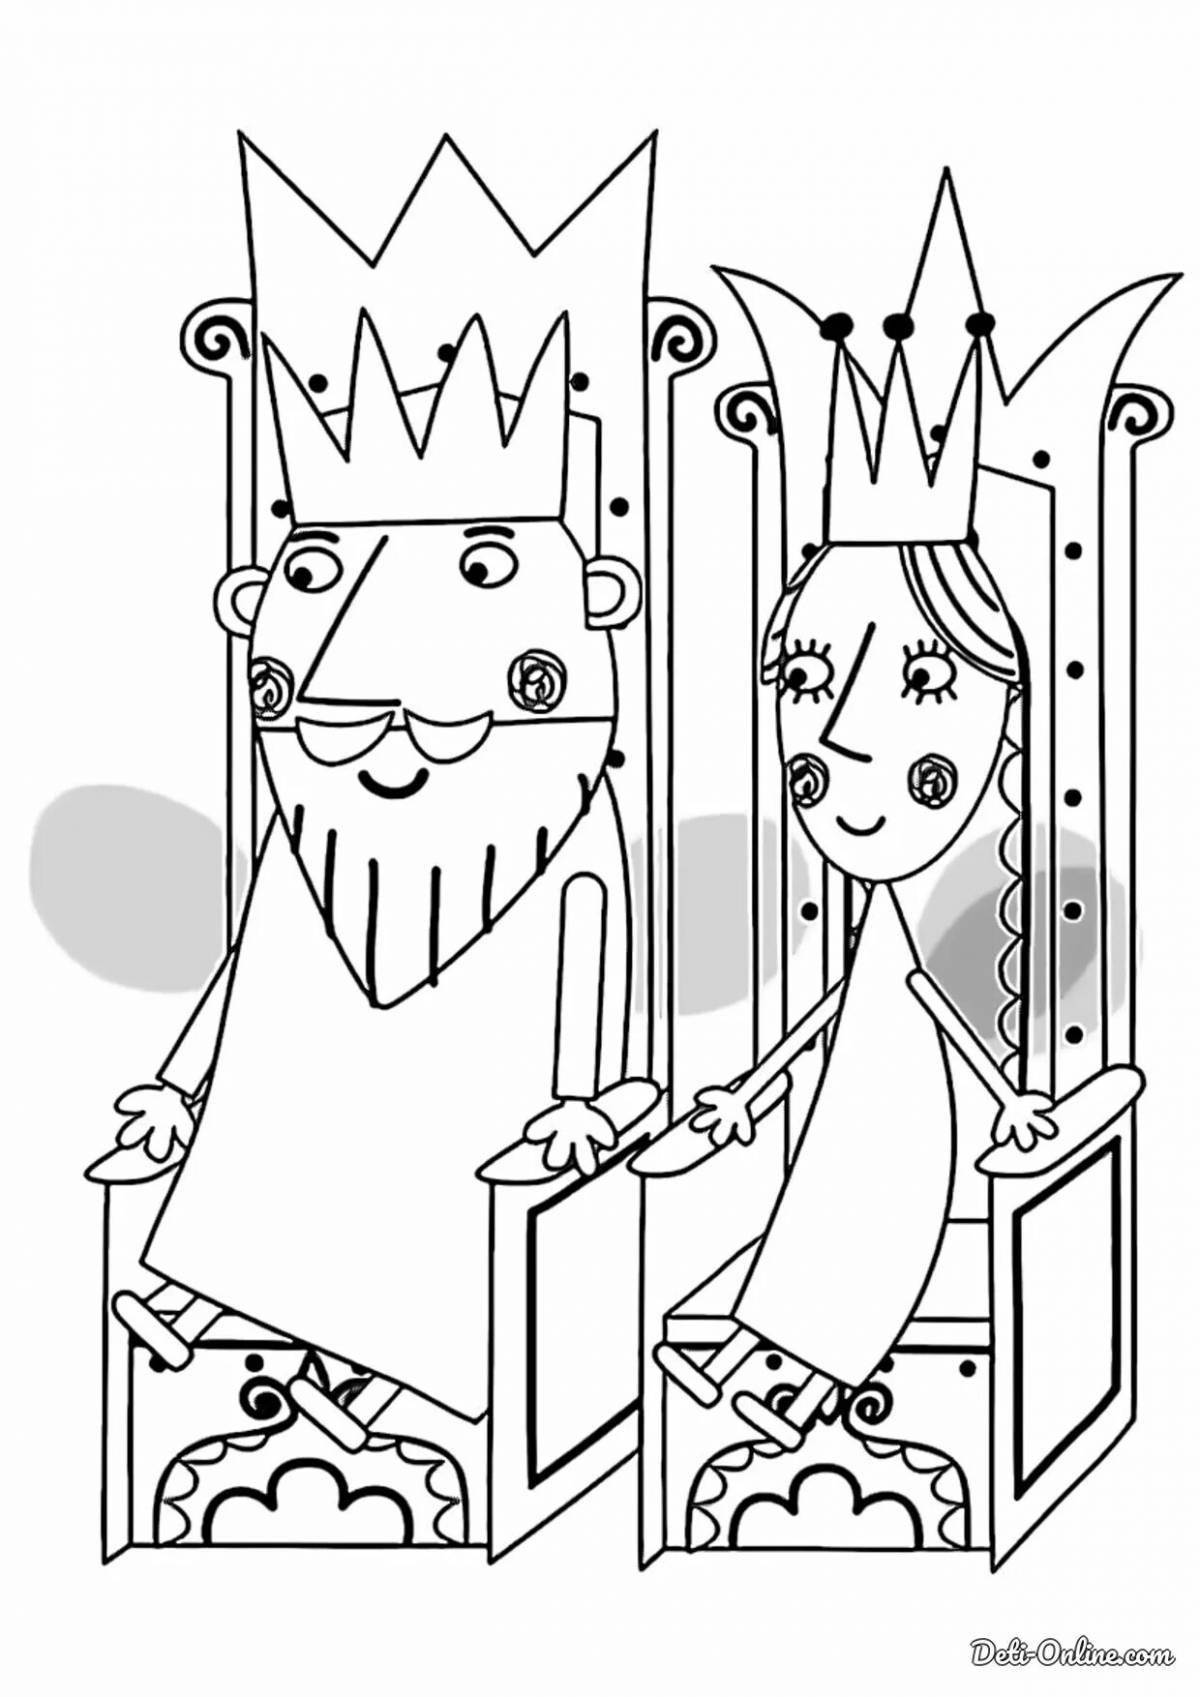 Colorful king and queen coloring book